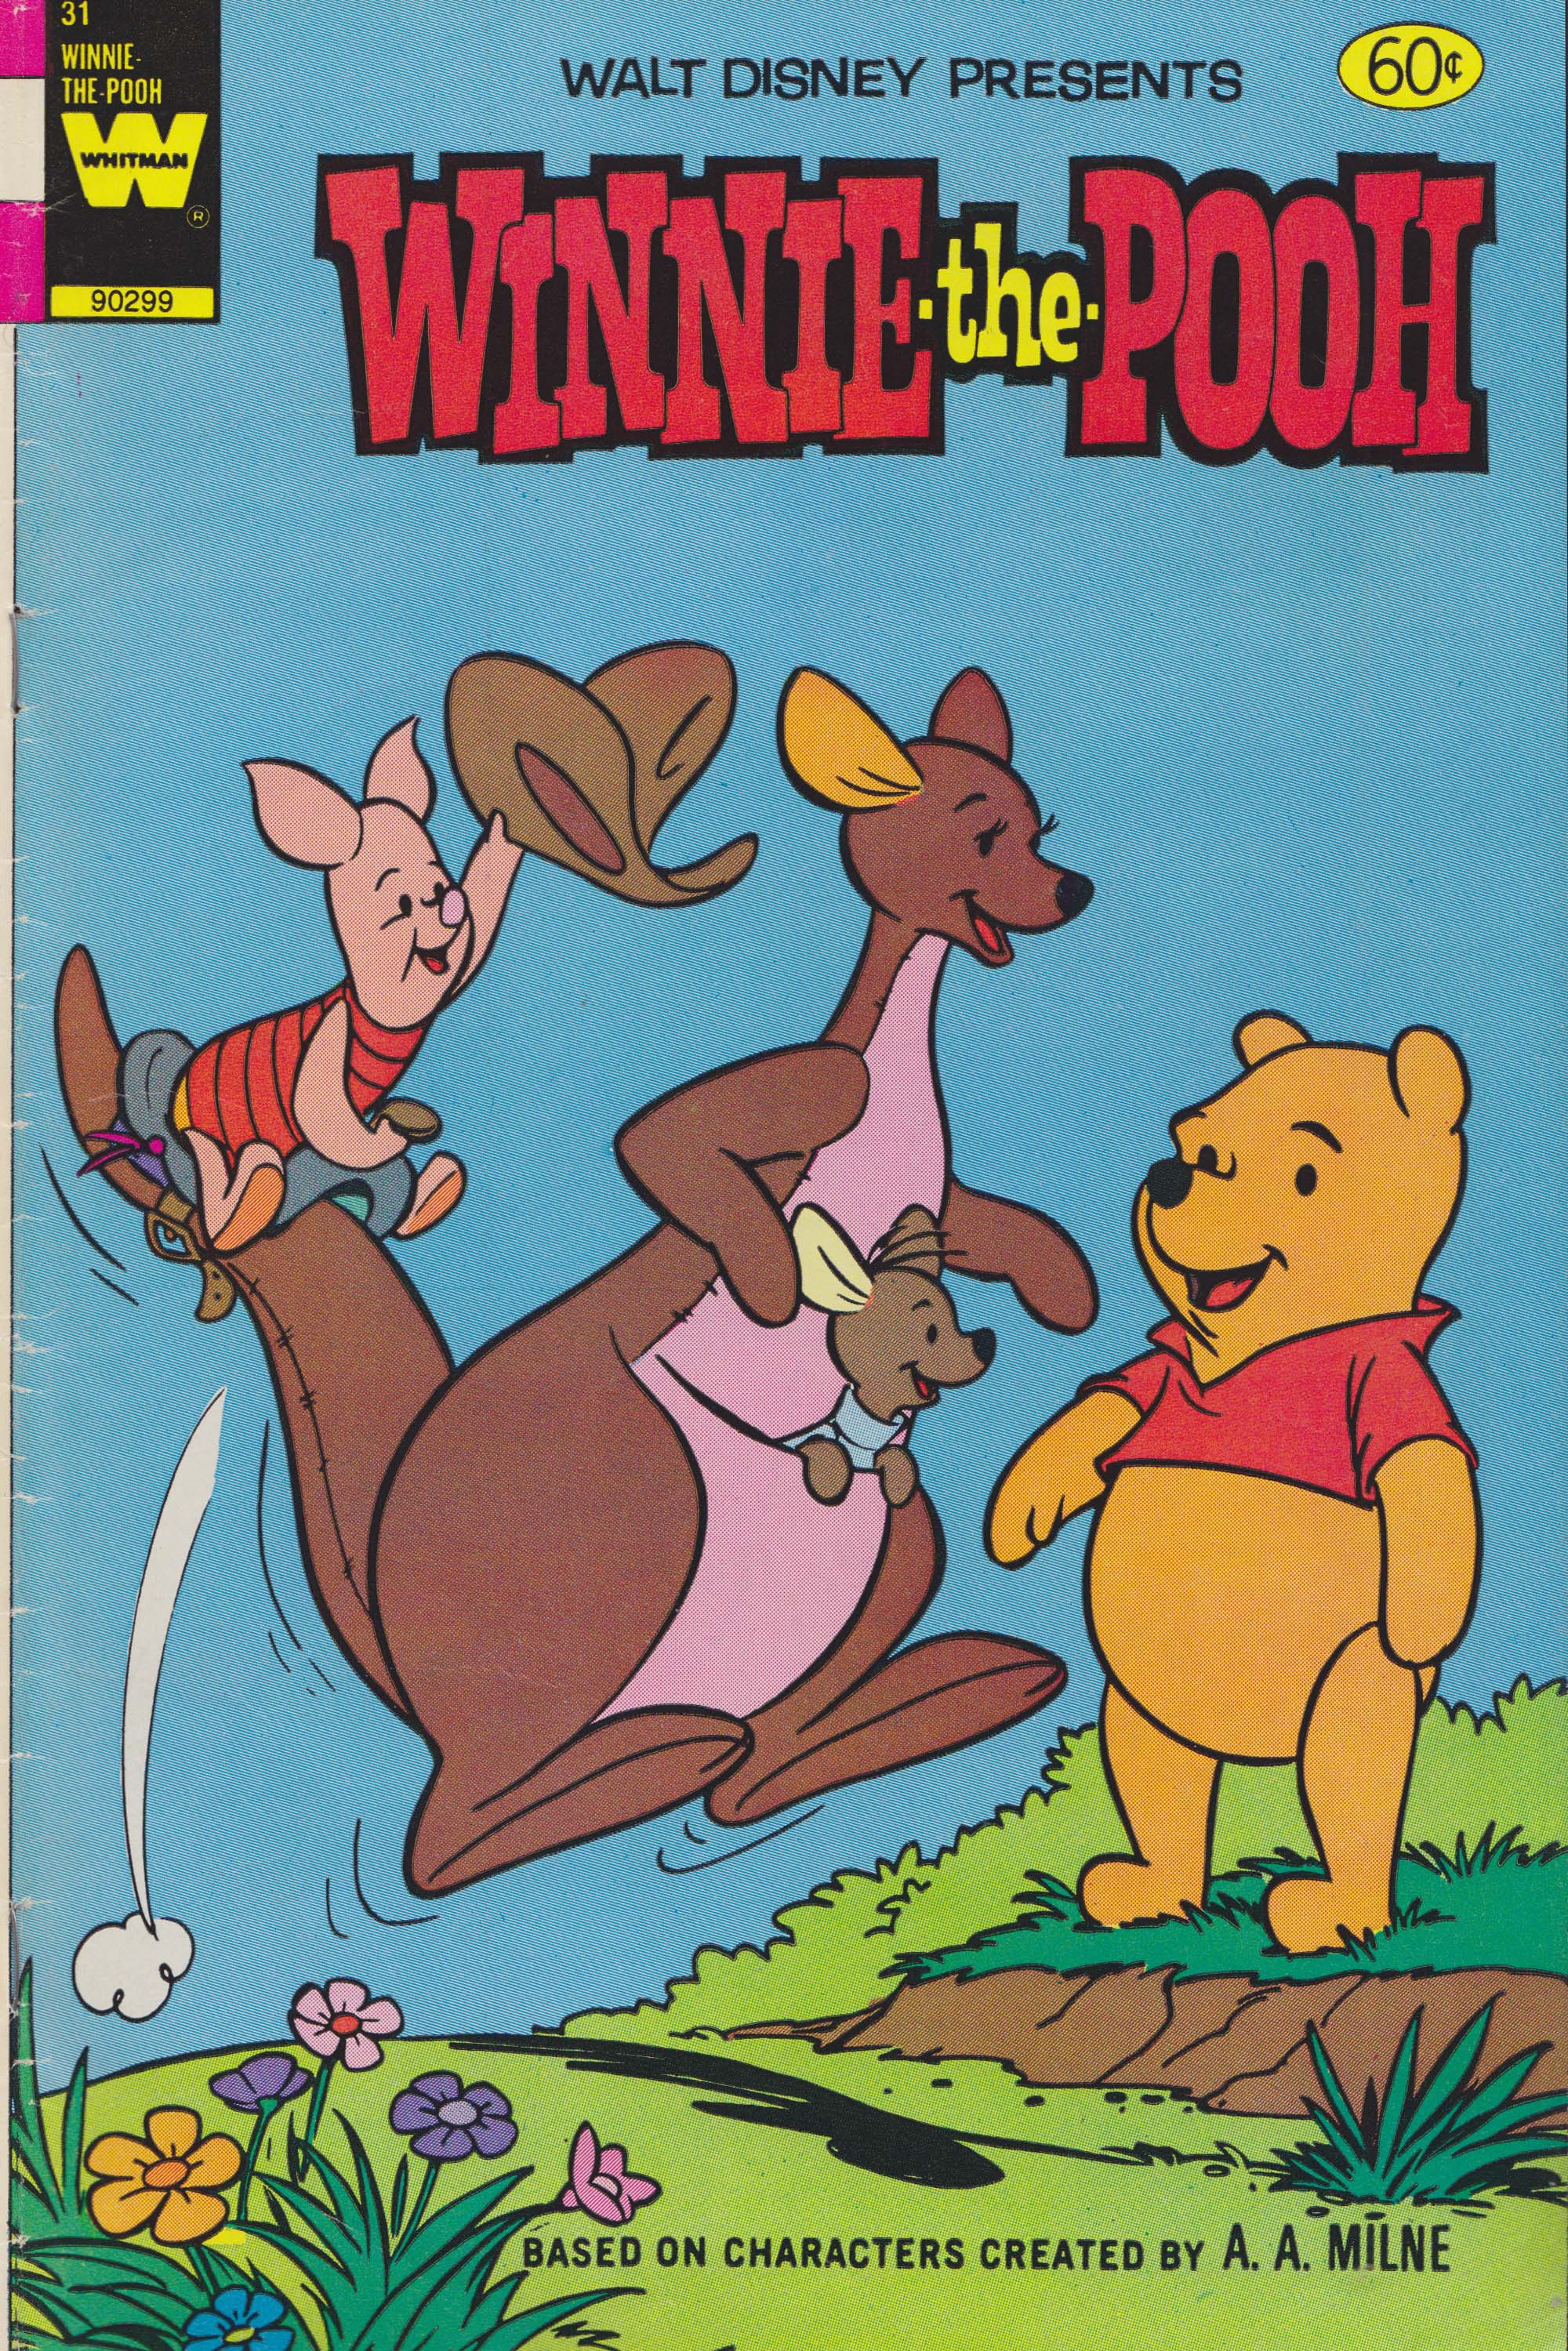 Read online Winnie-the-Pooh comic -  Issue #31 - 1